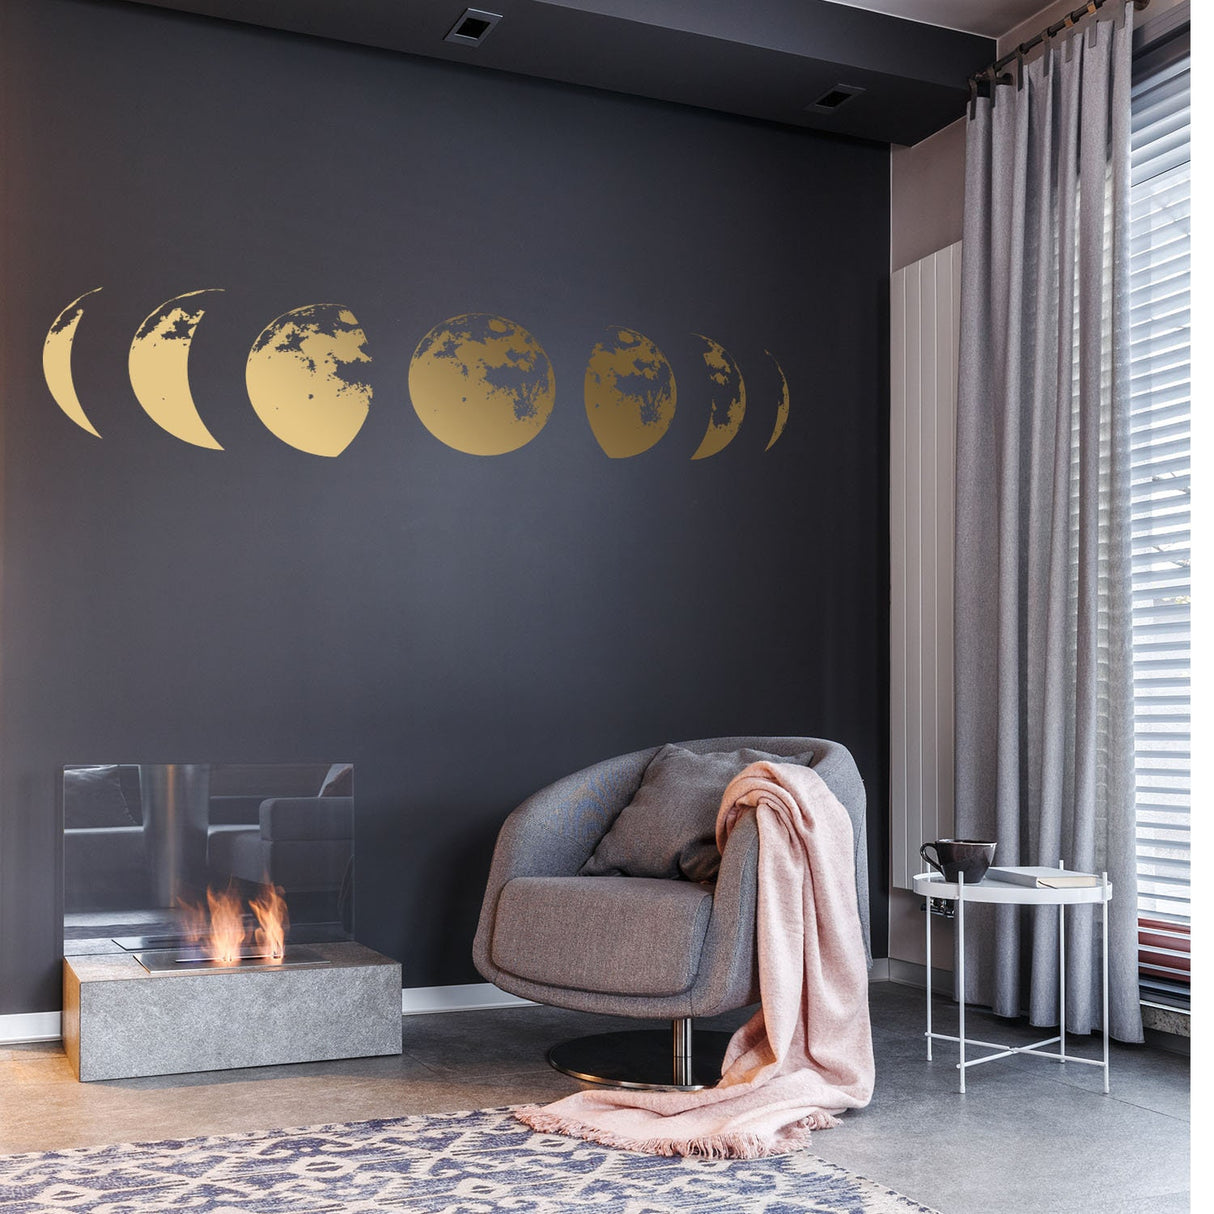 Moon Phases Wall Decor Decal - Gold Home Art Living Room Bedroom Sticker Decoration